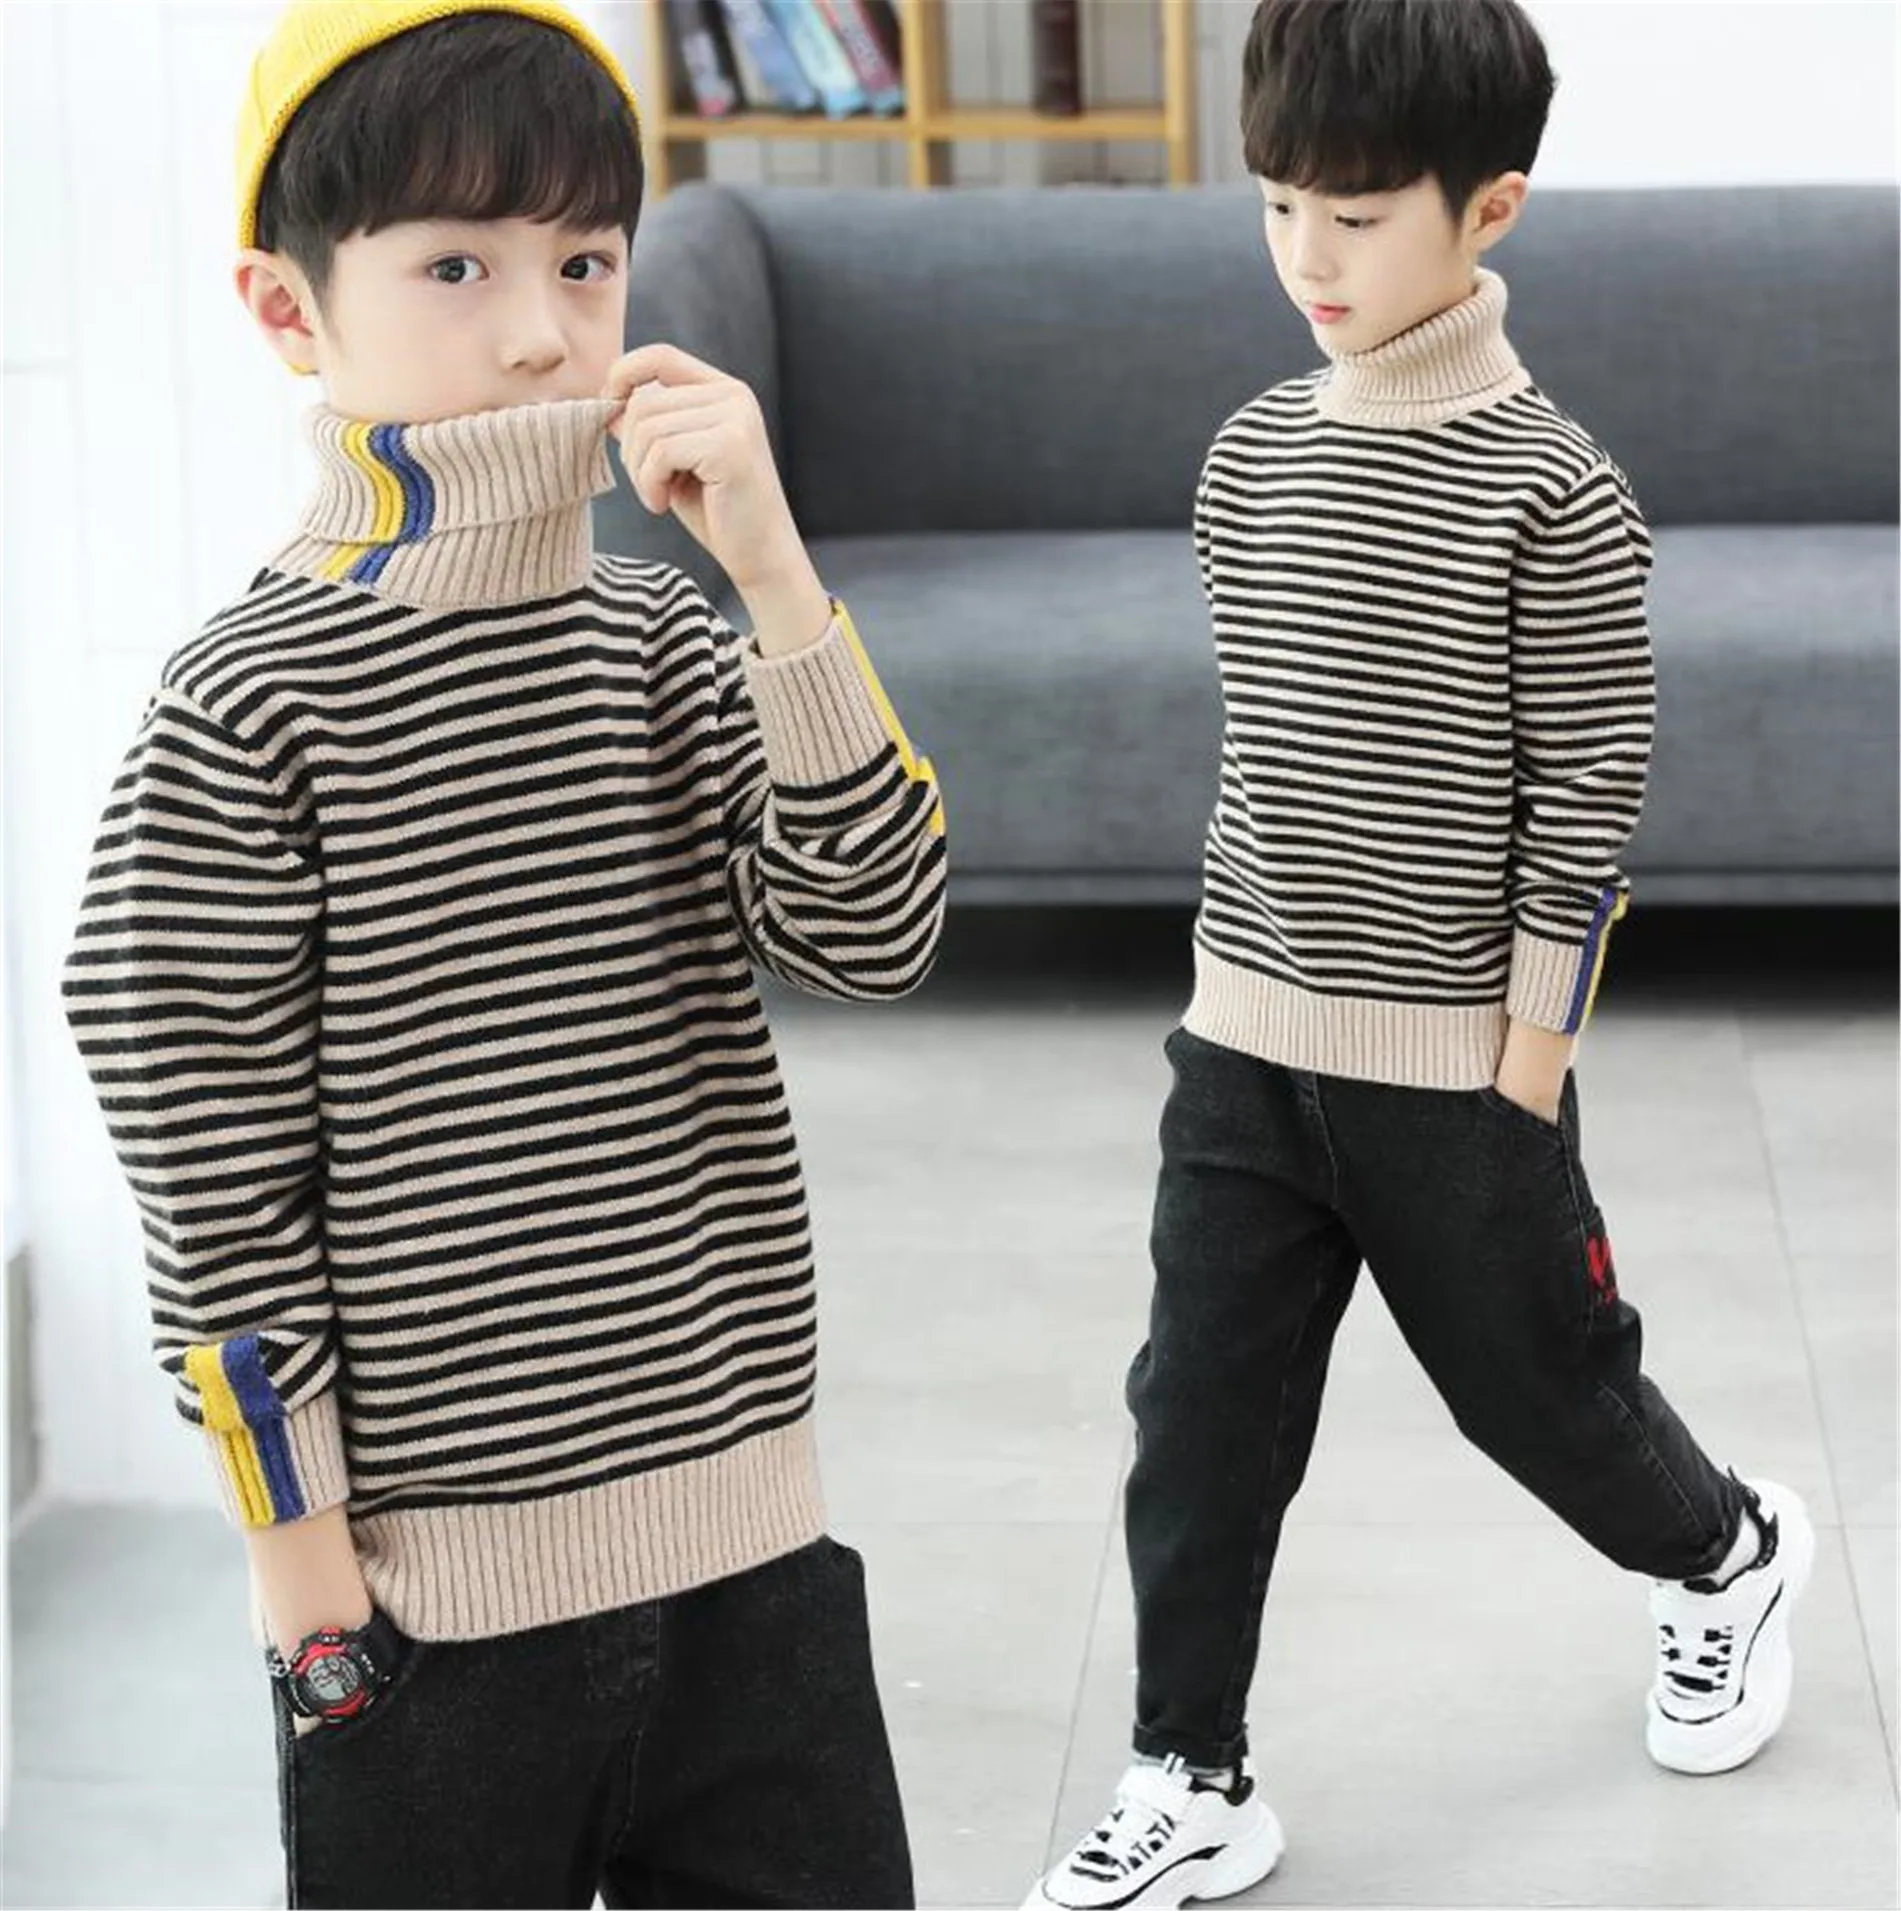 

Boys Winter Sweater kids Warm Fashion casual Pullovers Striped Knitted Sweaters Turtleneck Teenagers Clothes